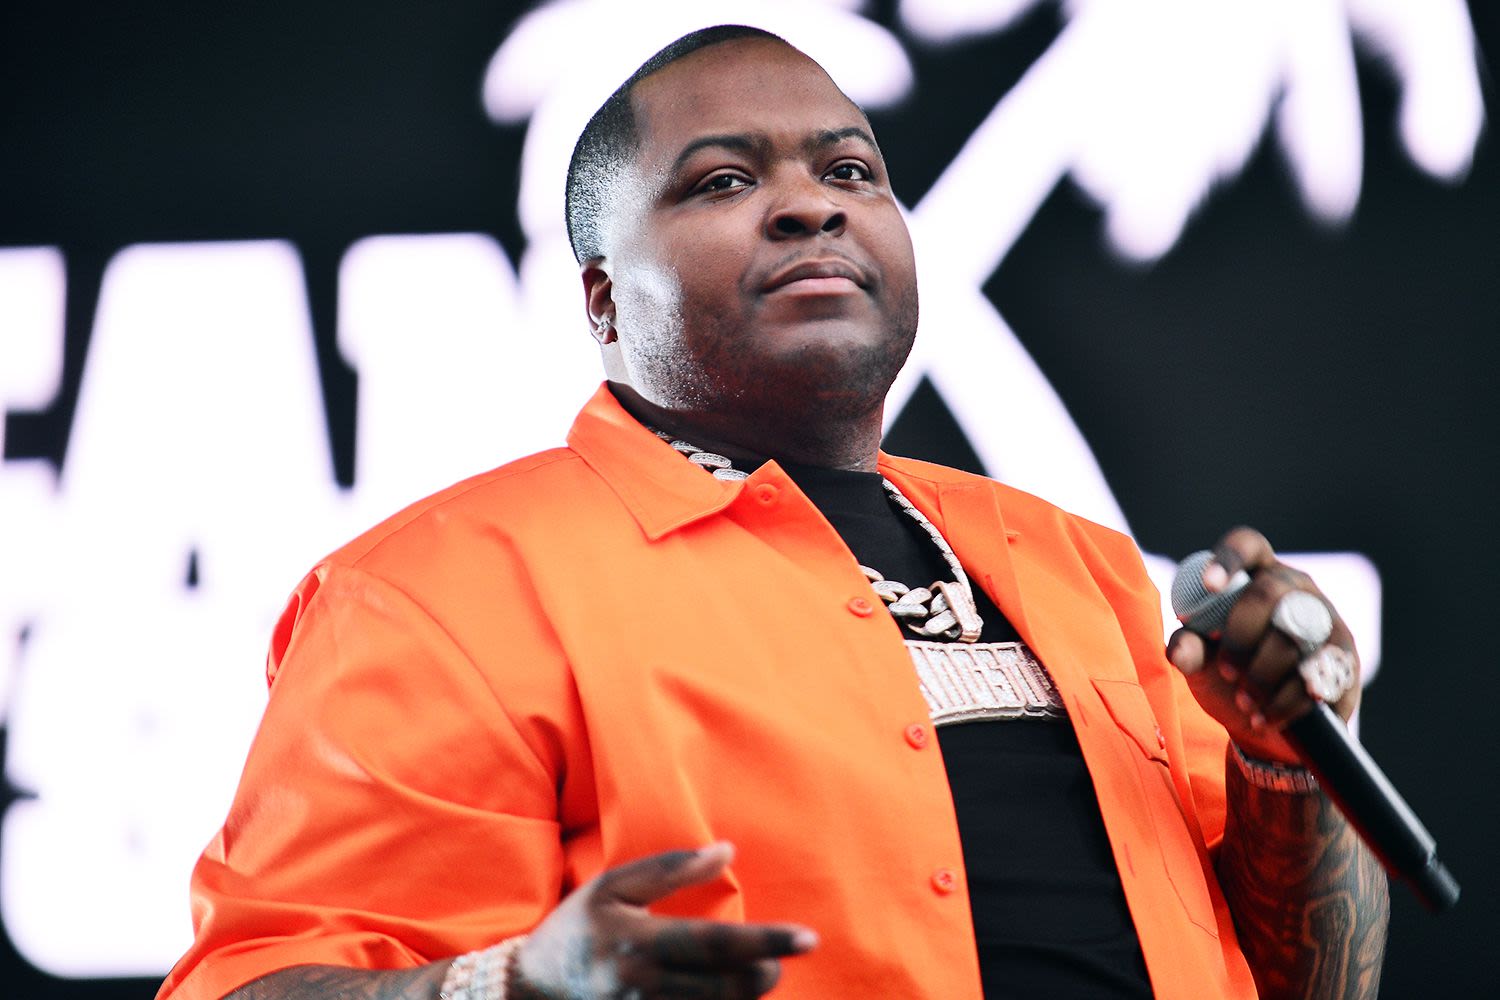 Sean Kingston's Mother Janice Turner Arrested on Fraud and Theft Charges at Singer's Rented Mansion: Police